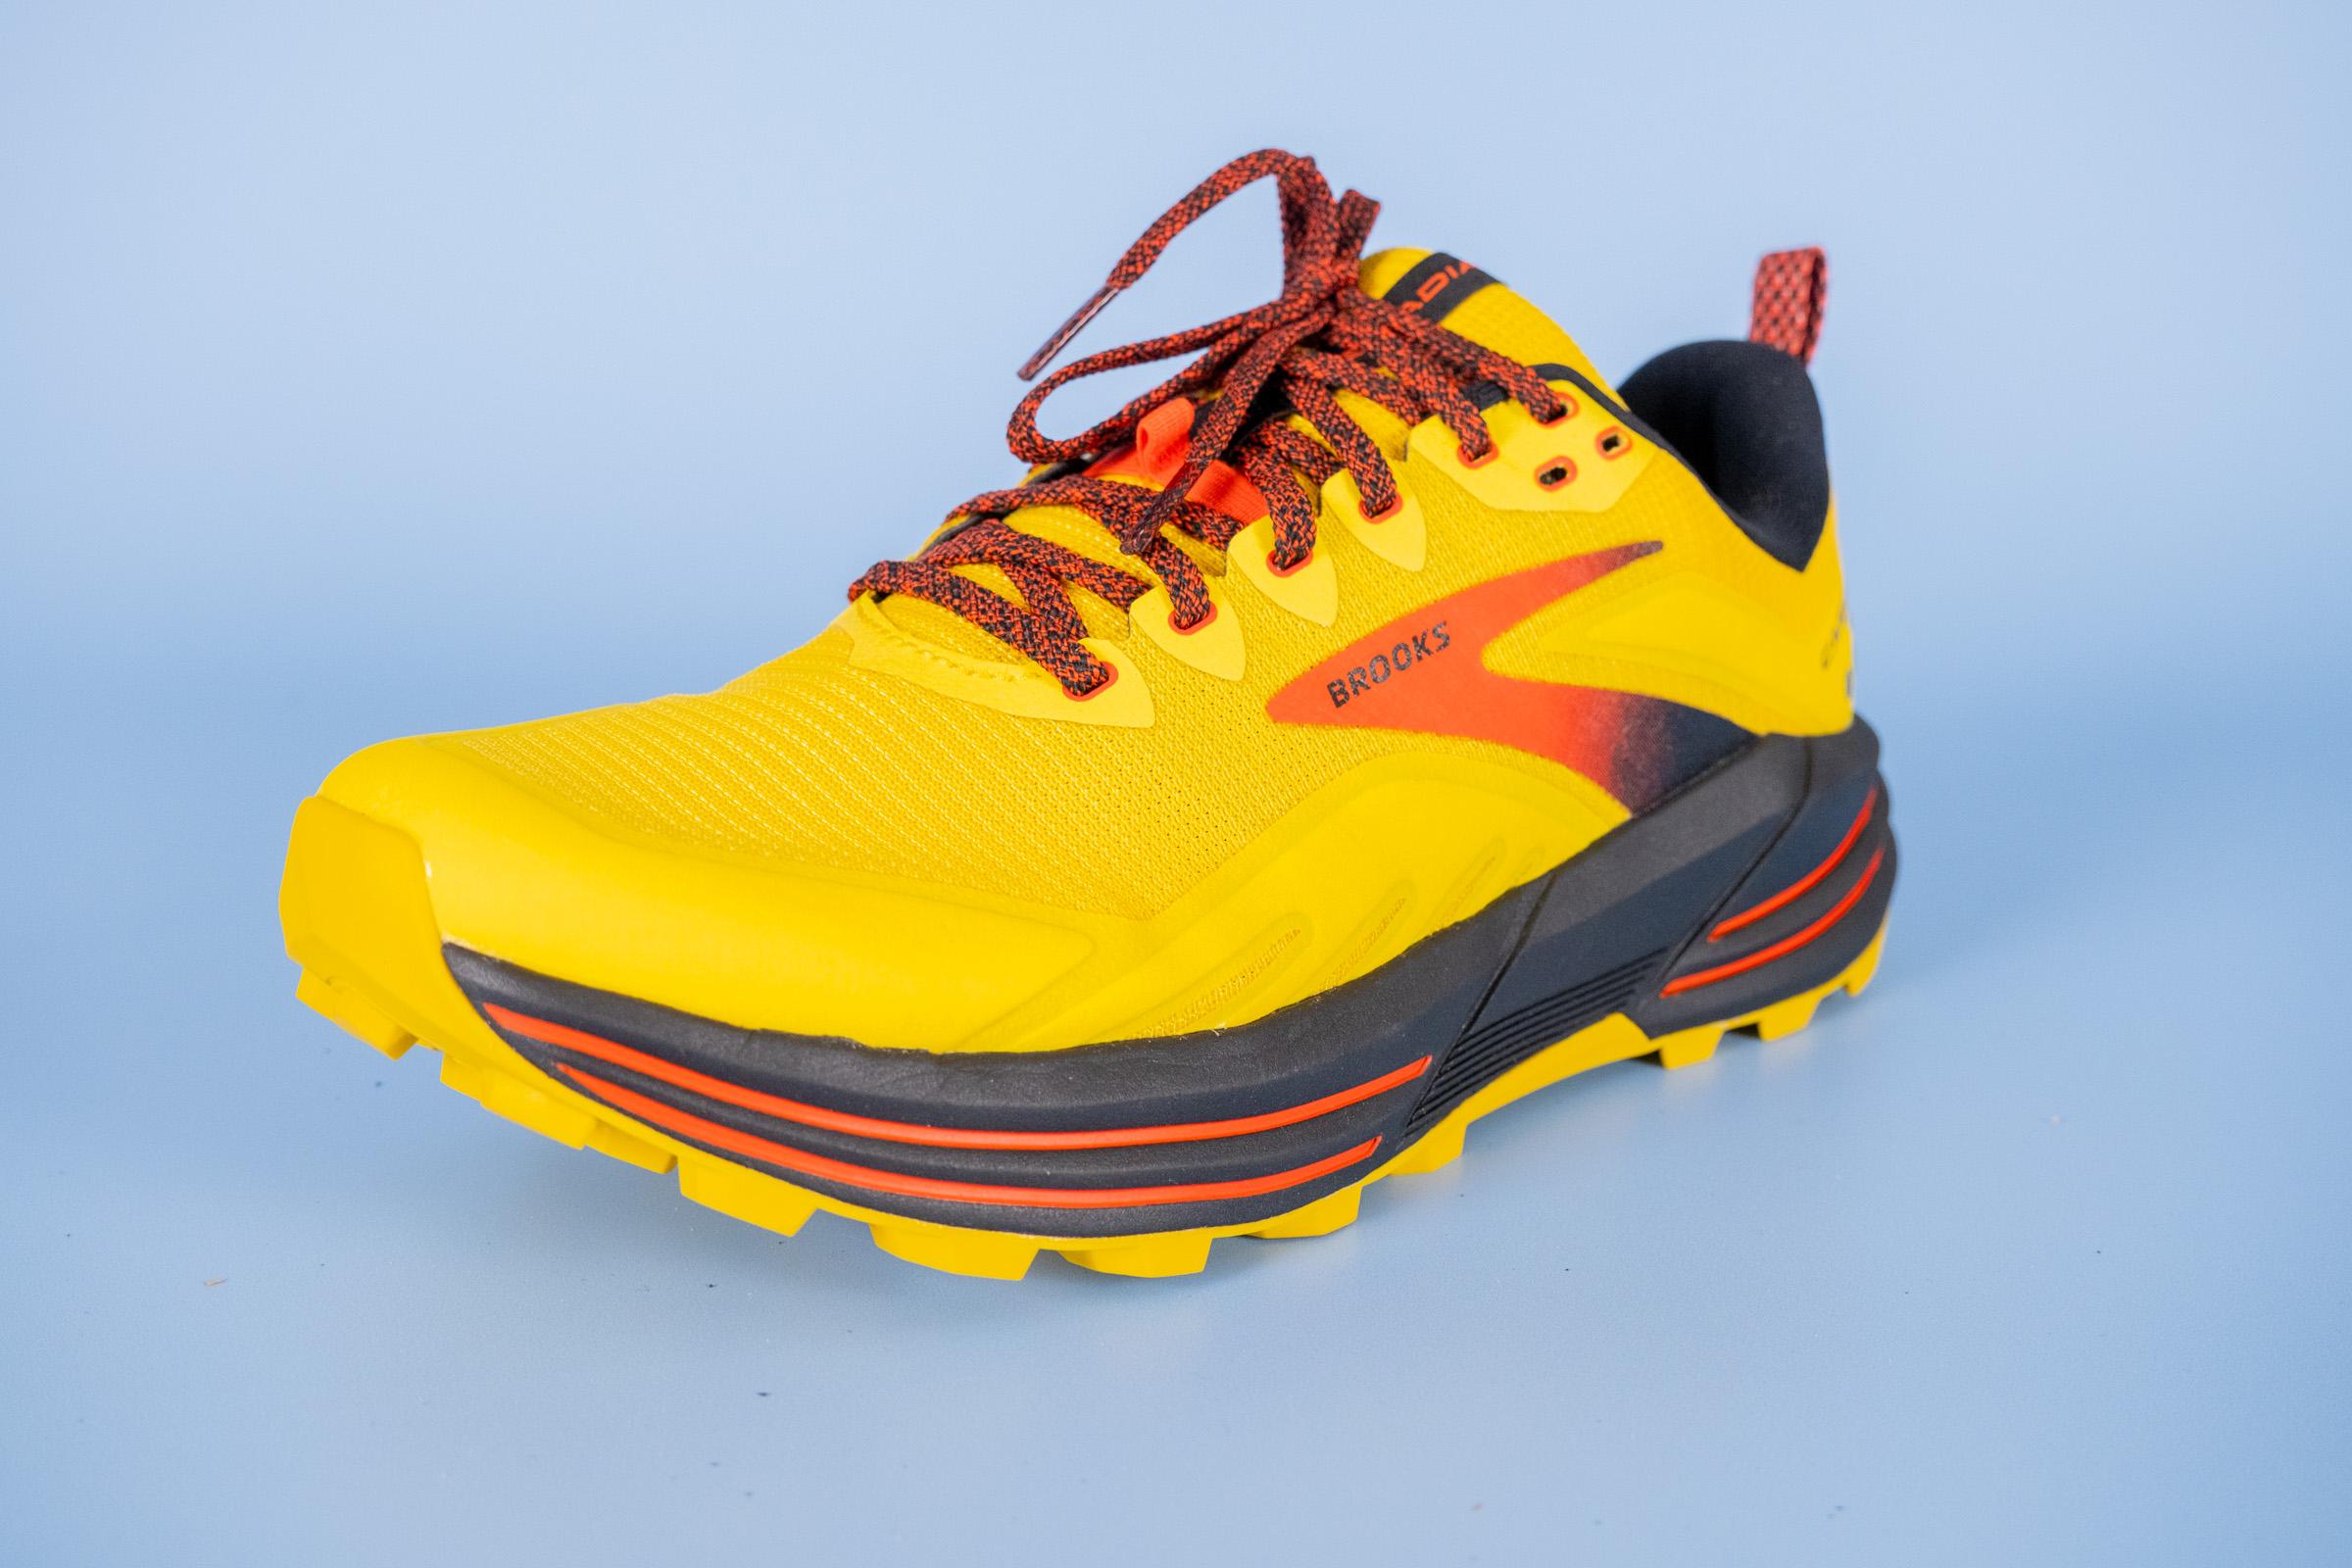 Cut in half: Brooks Cascadia 16 Review